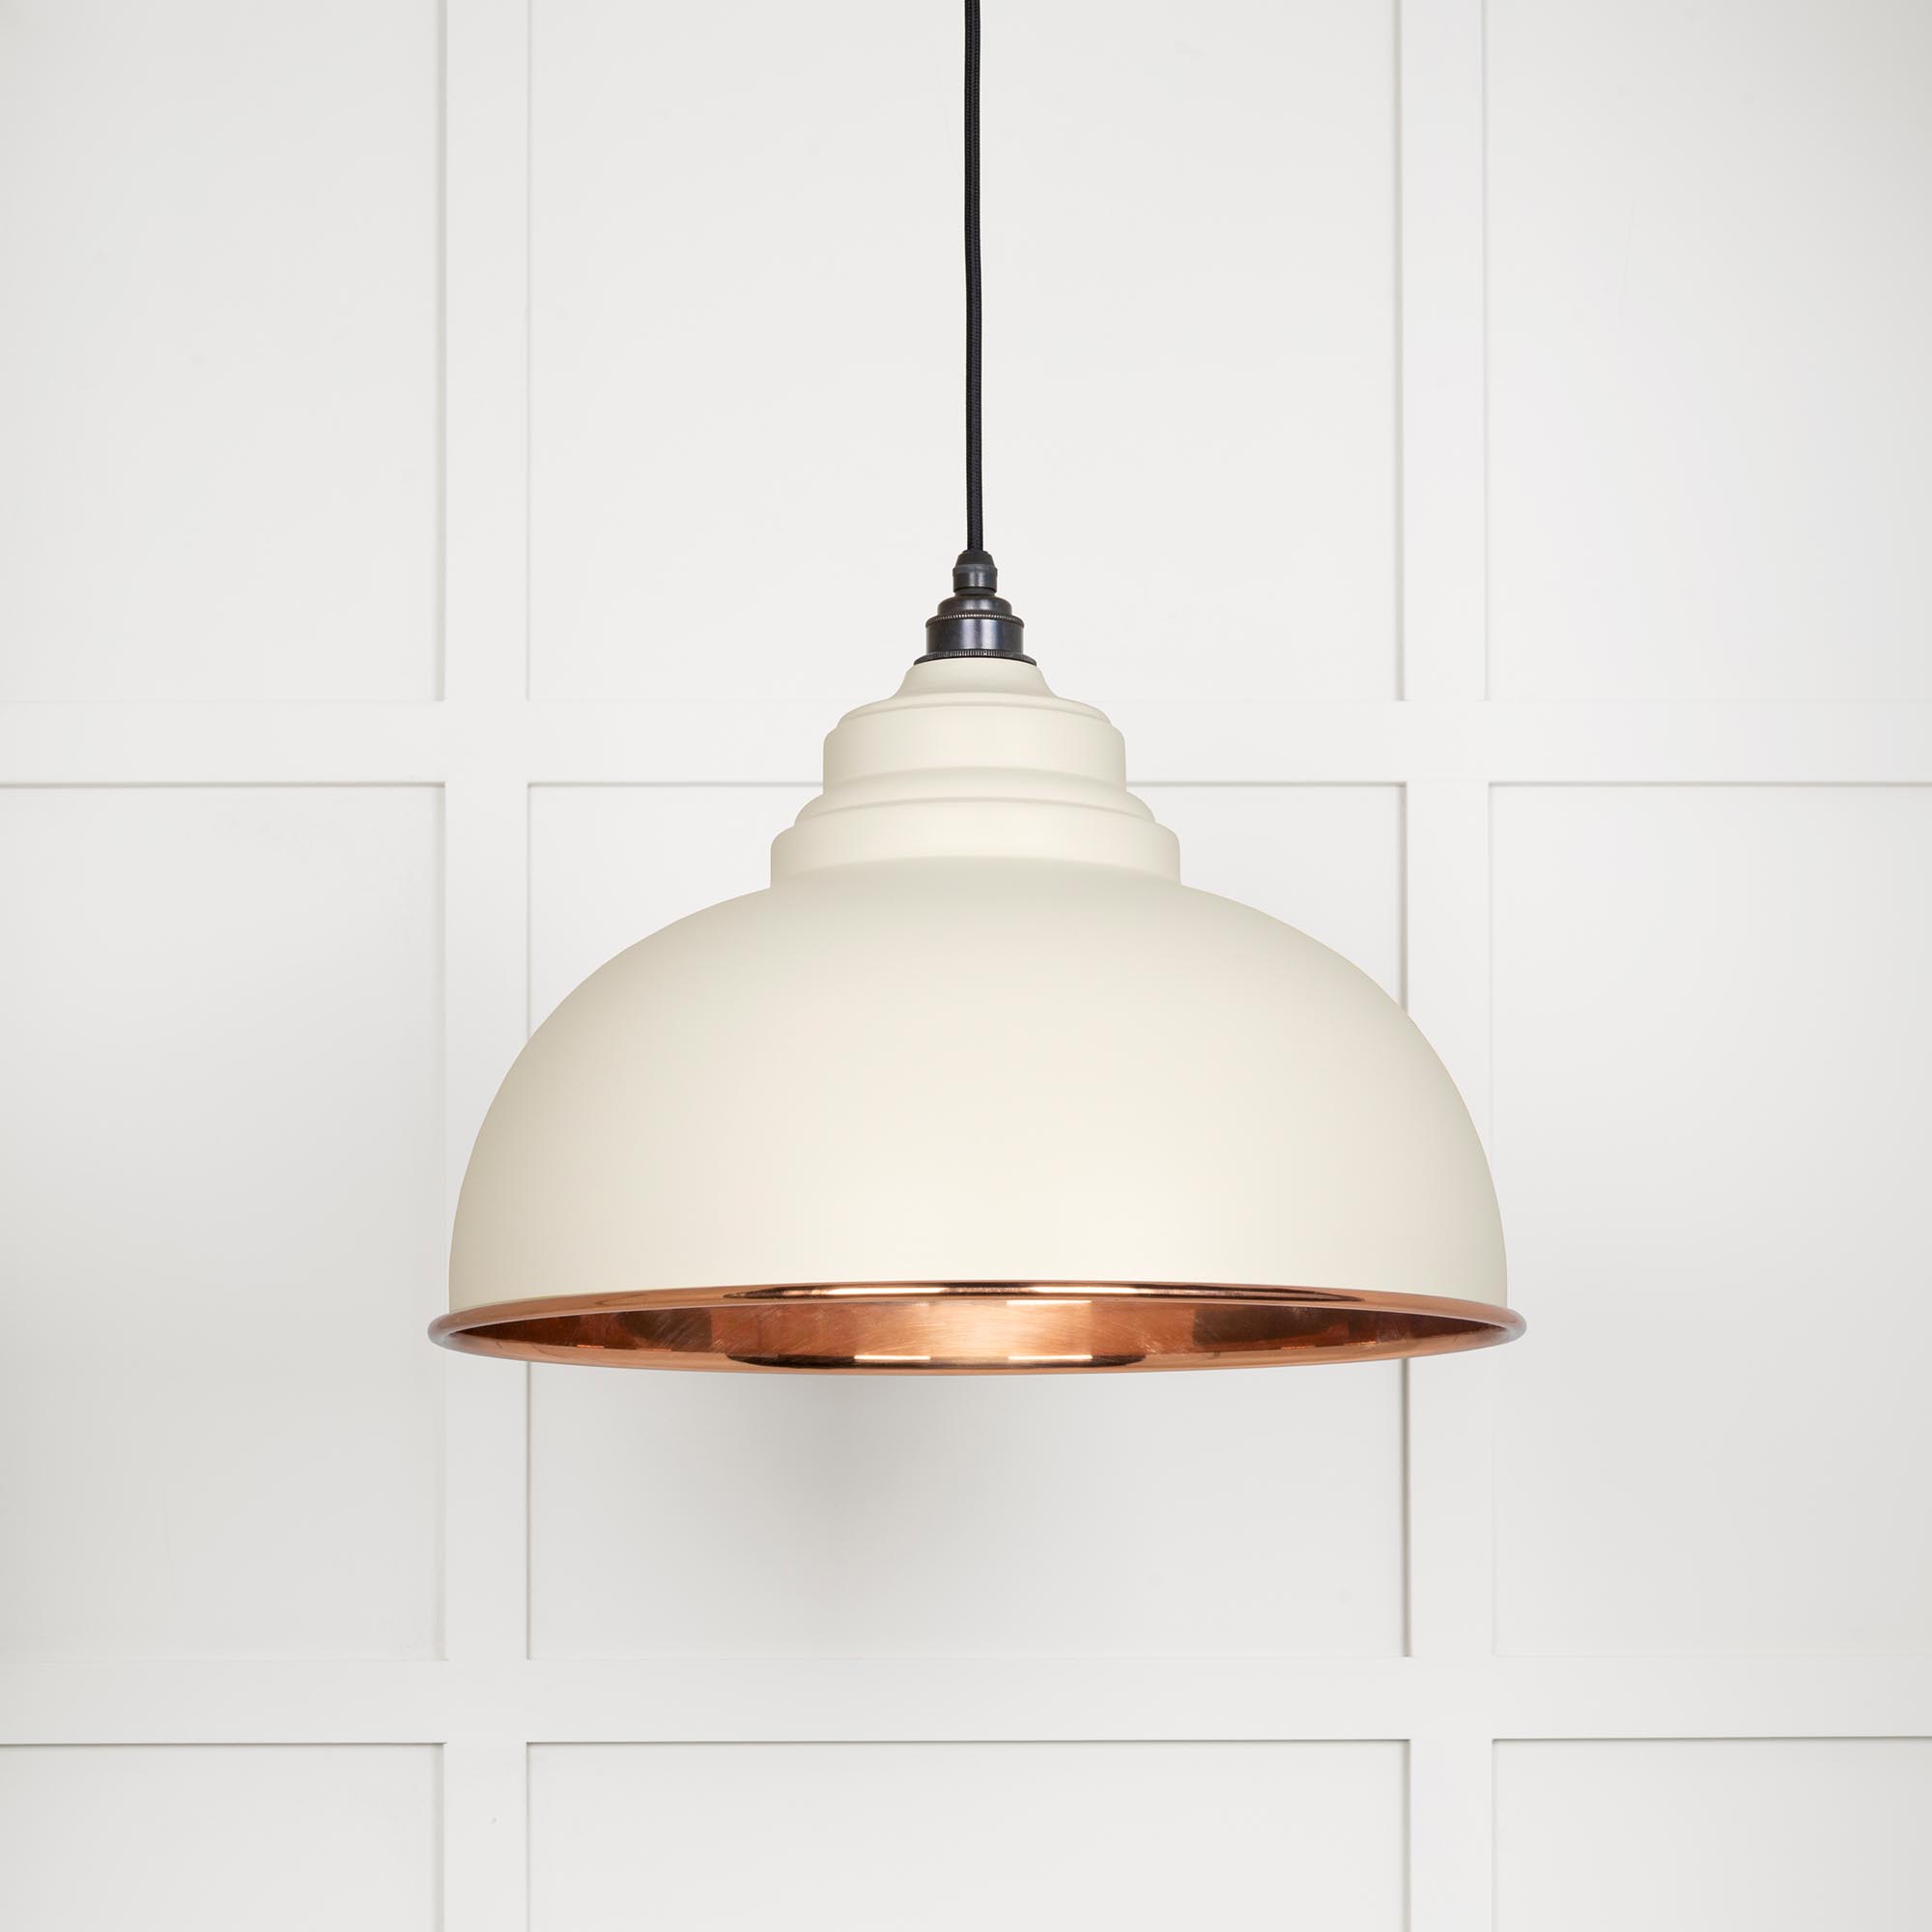 Smooth Copper Harborne Pendant in Teasel